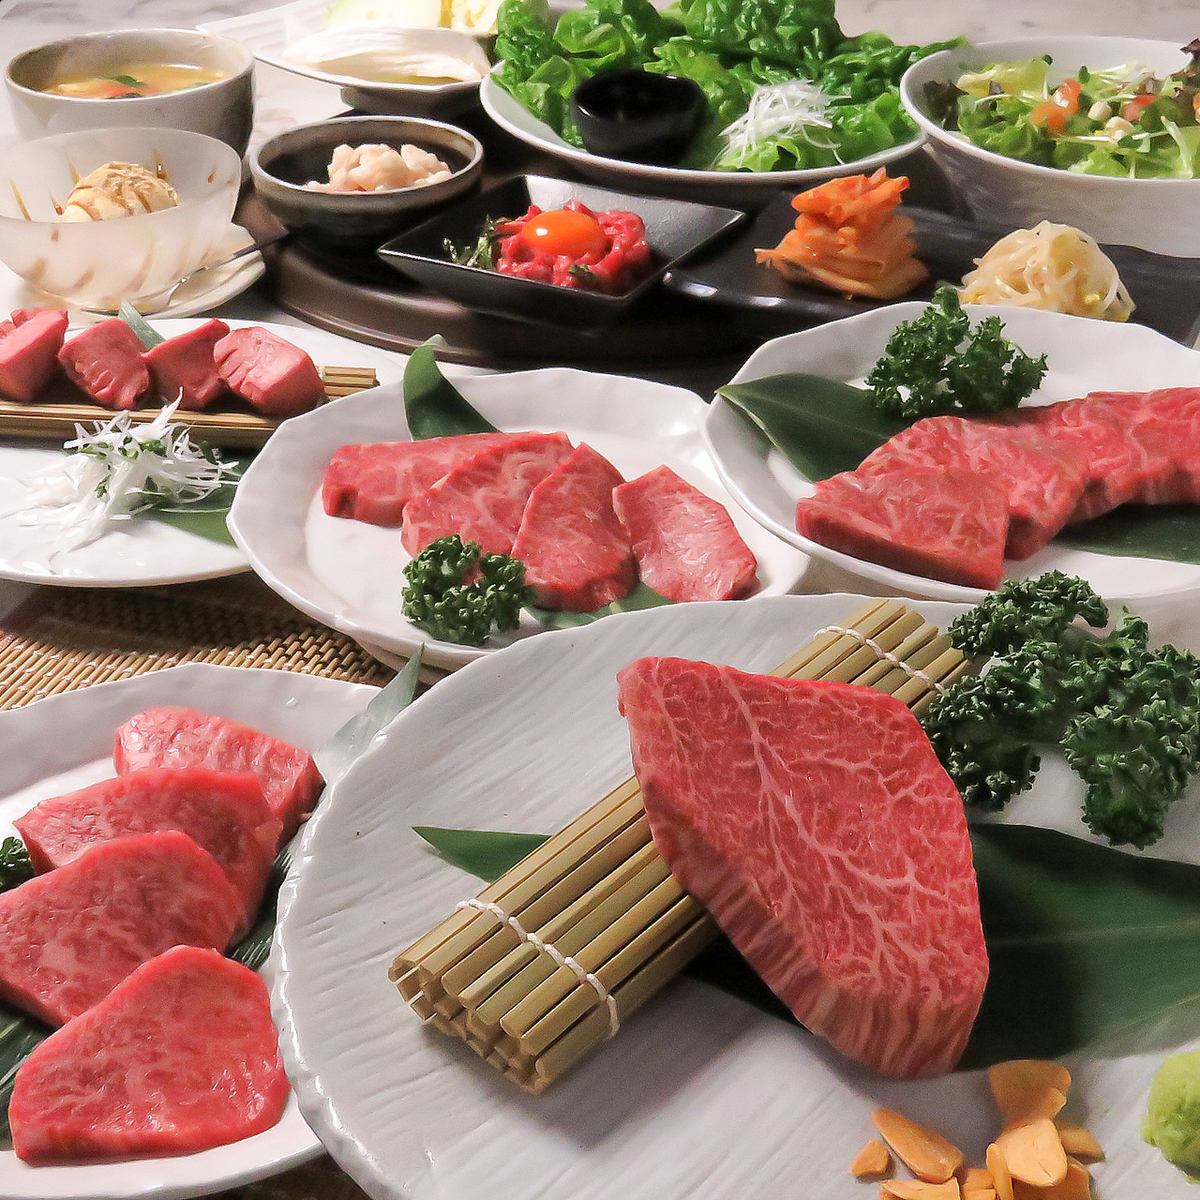 If you want to enjoy branded beef in a completely private room [private room yakiniku warm] very popular [raw yukhoe]